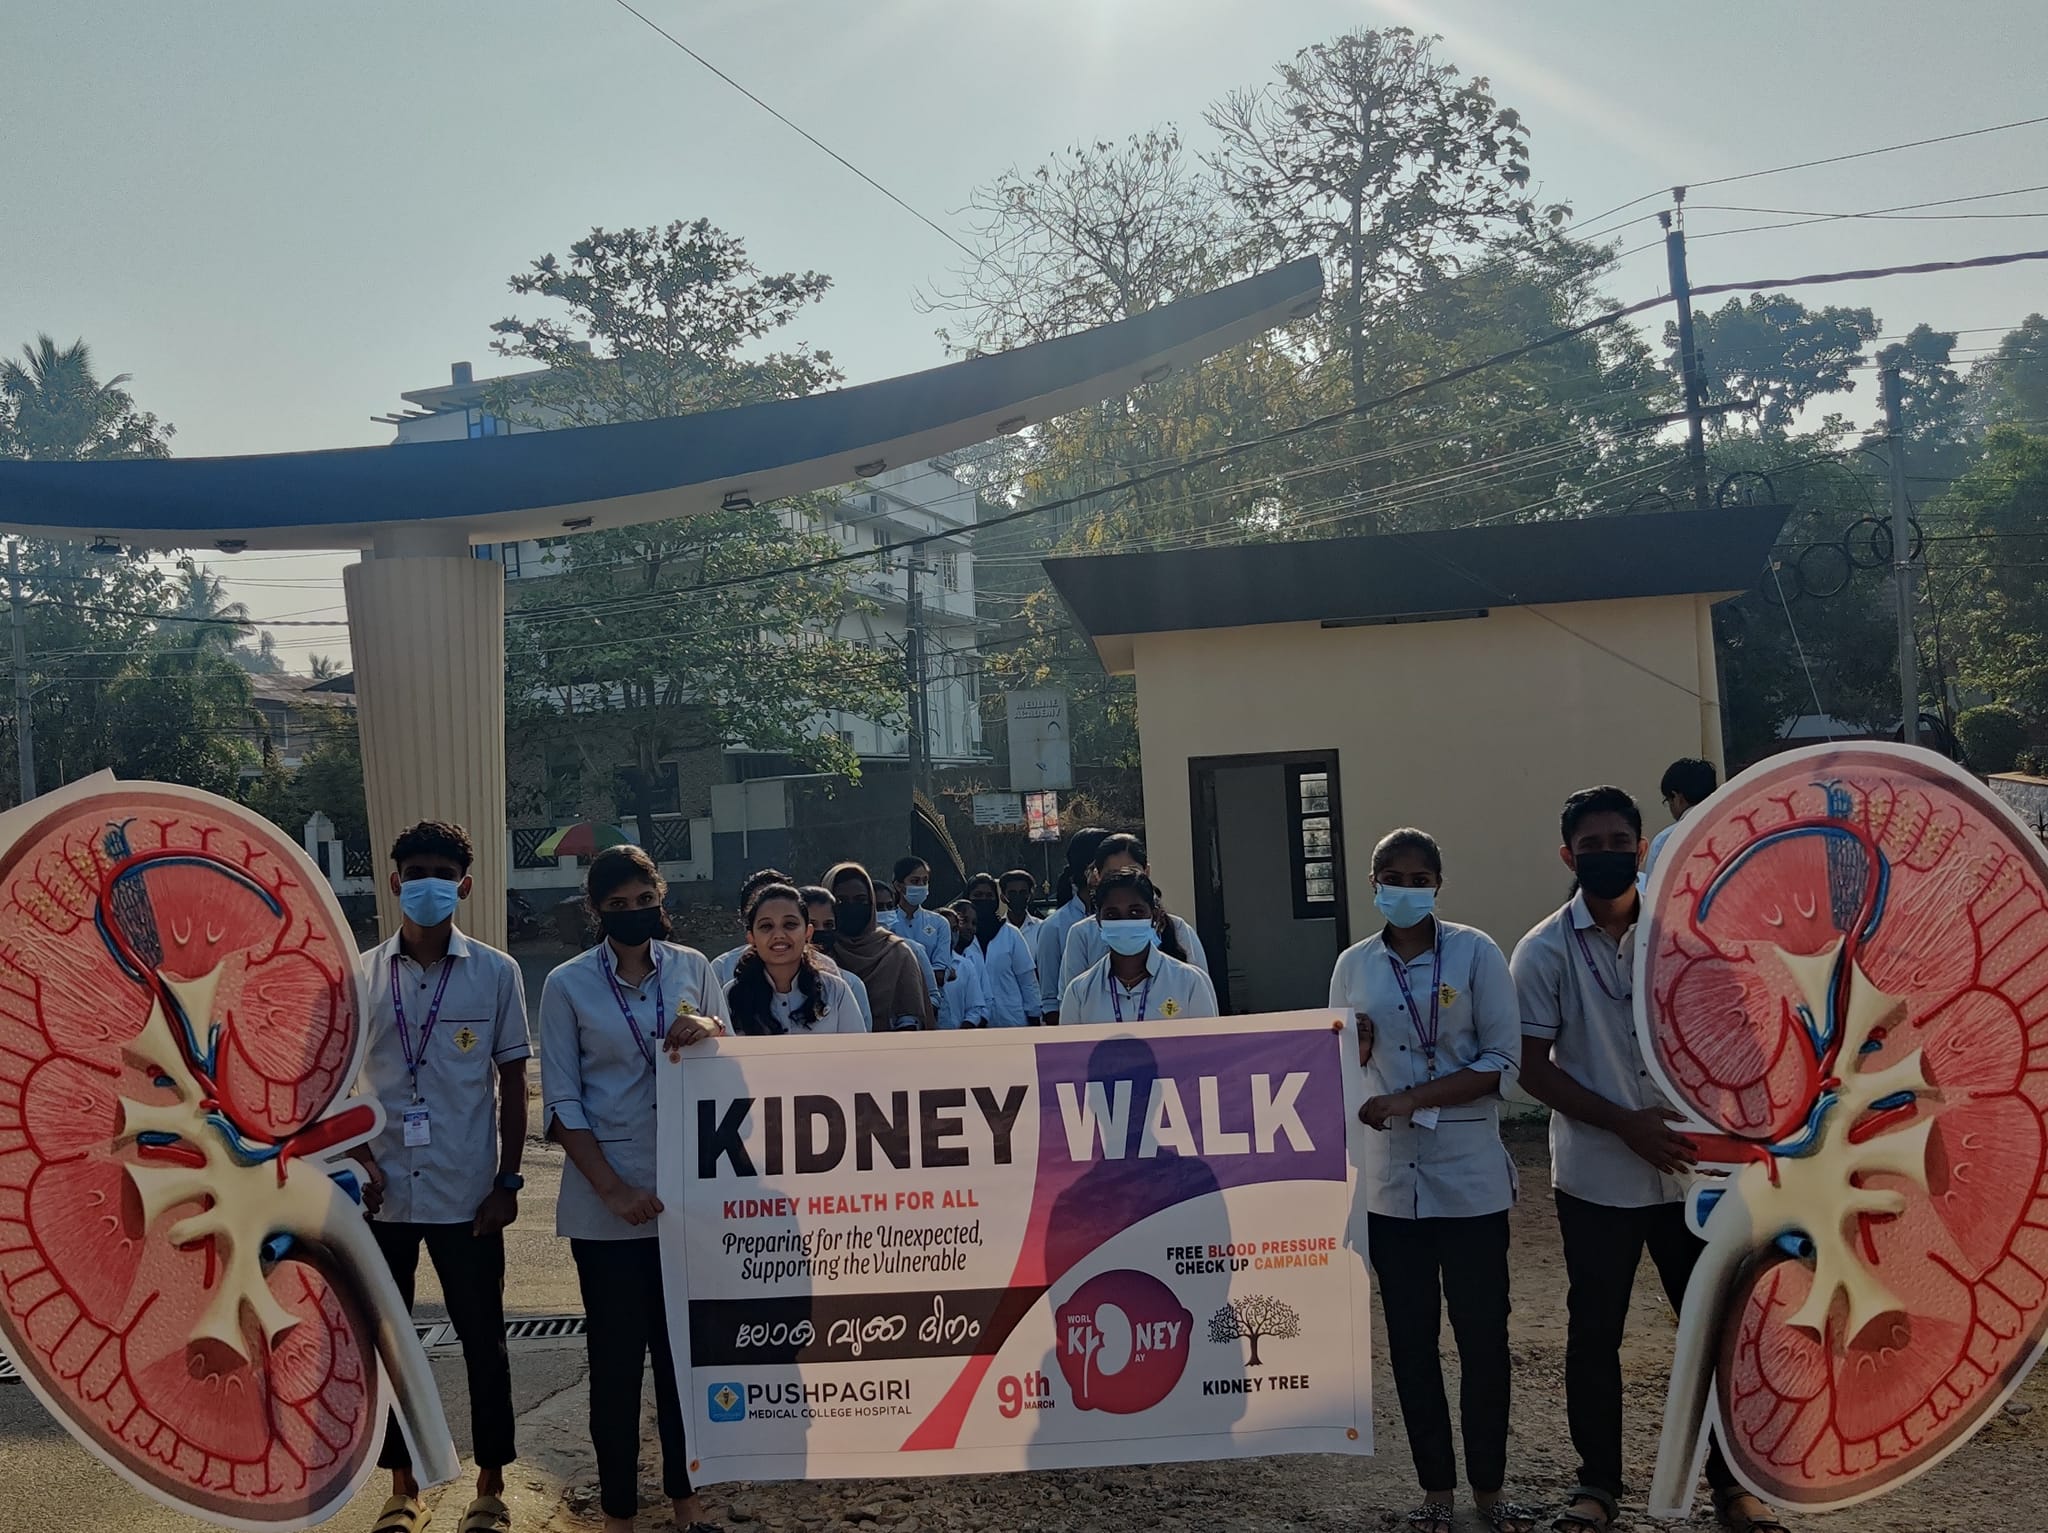 awareness about kidneys and kidney diseases